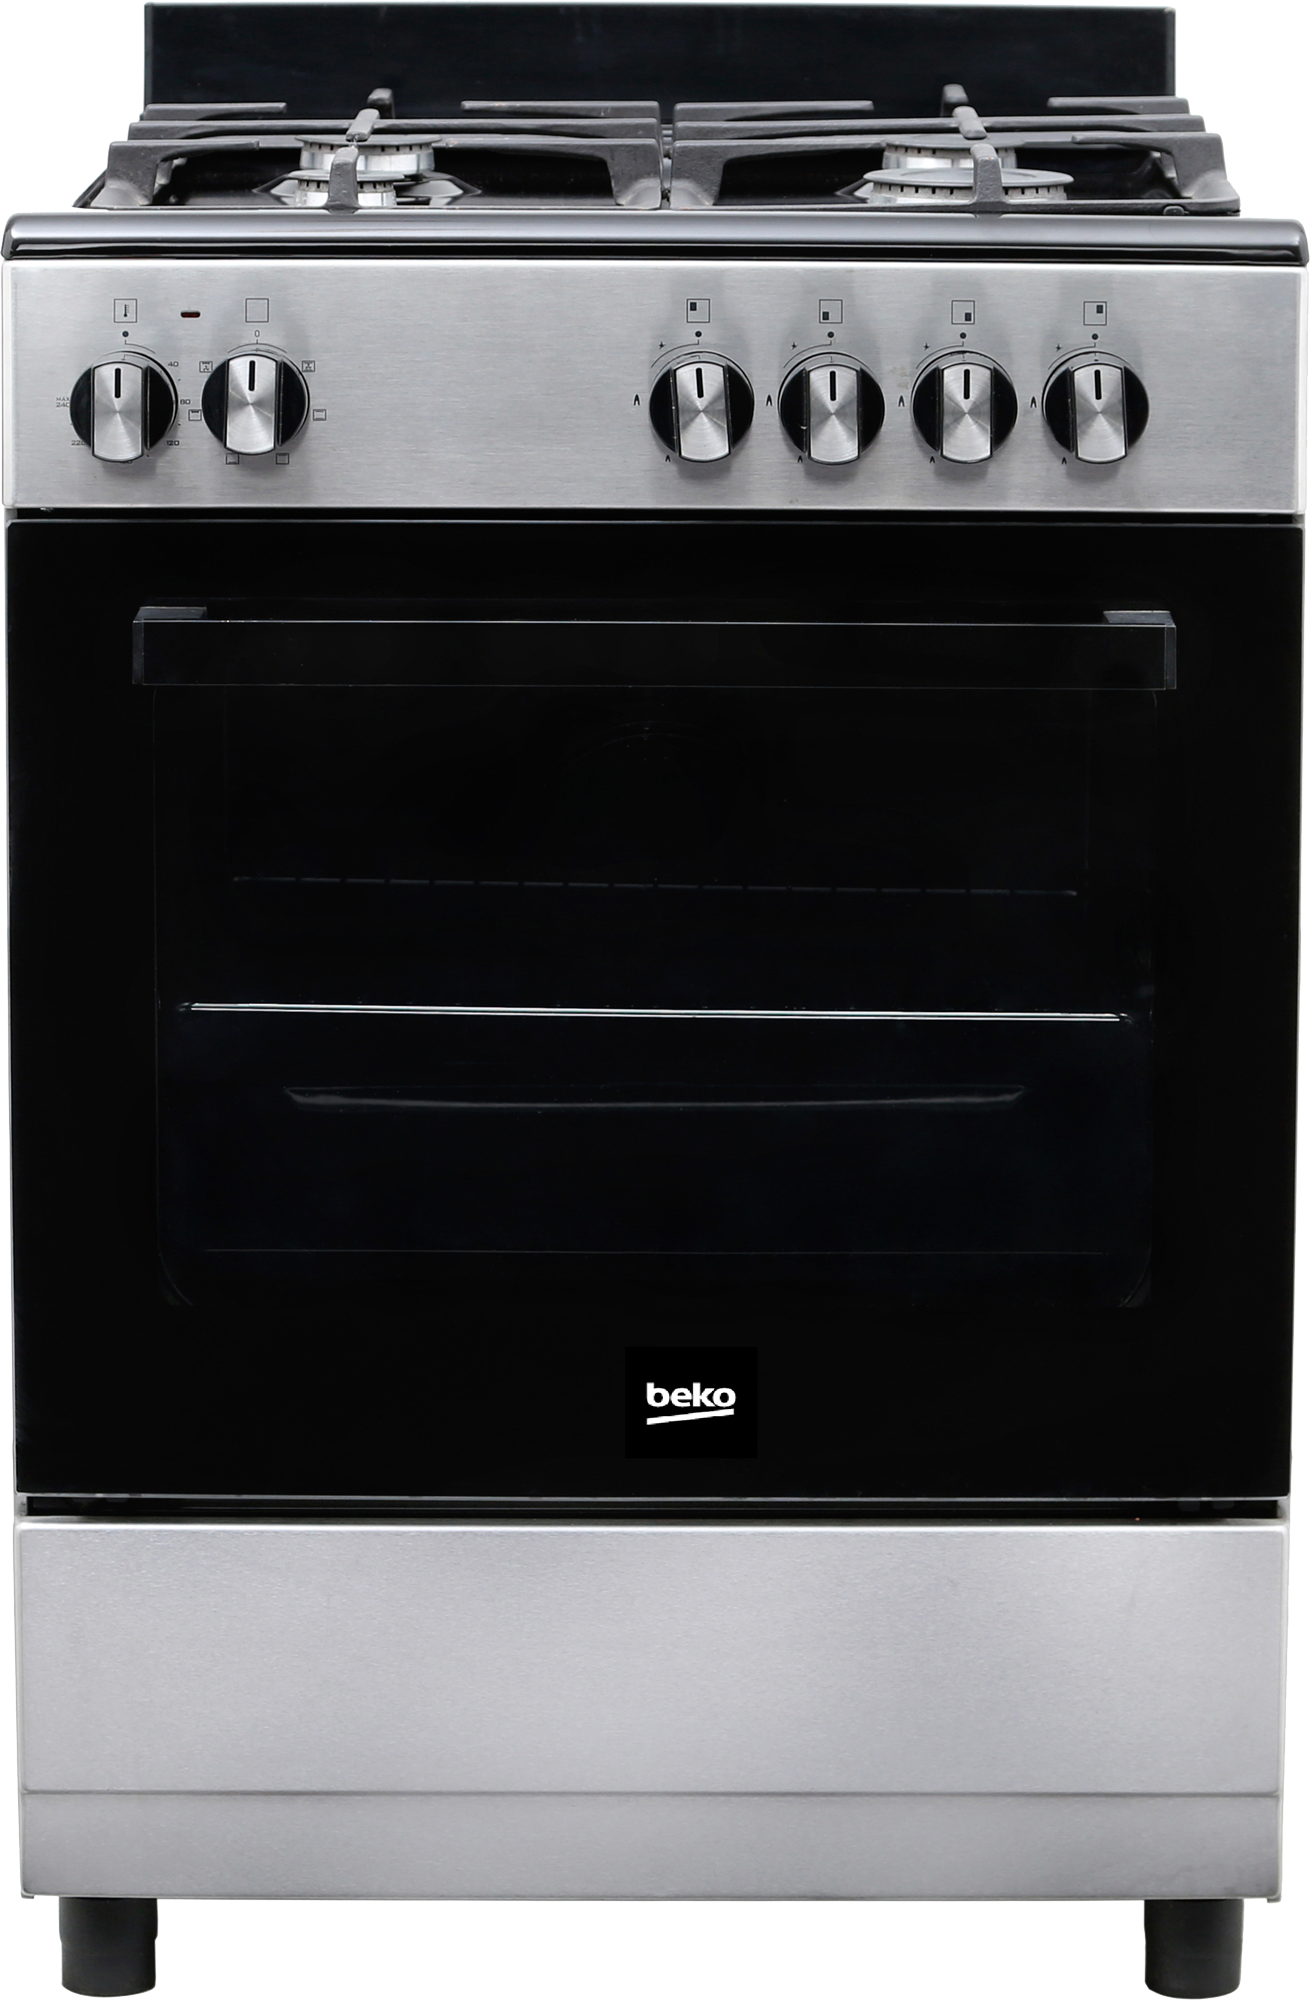 BEKO STANDING GAS COOKER BGS602-NG